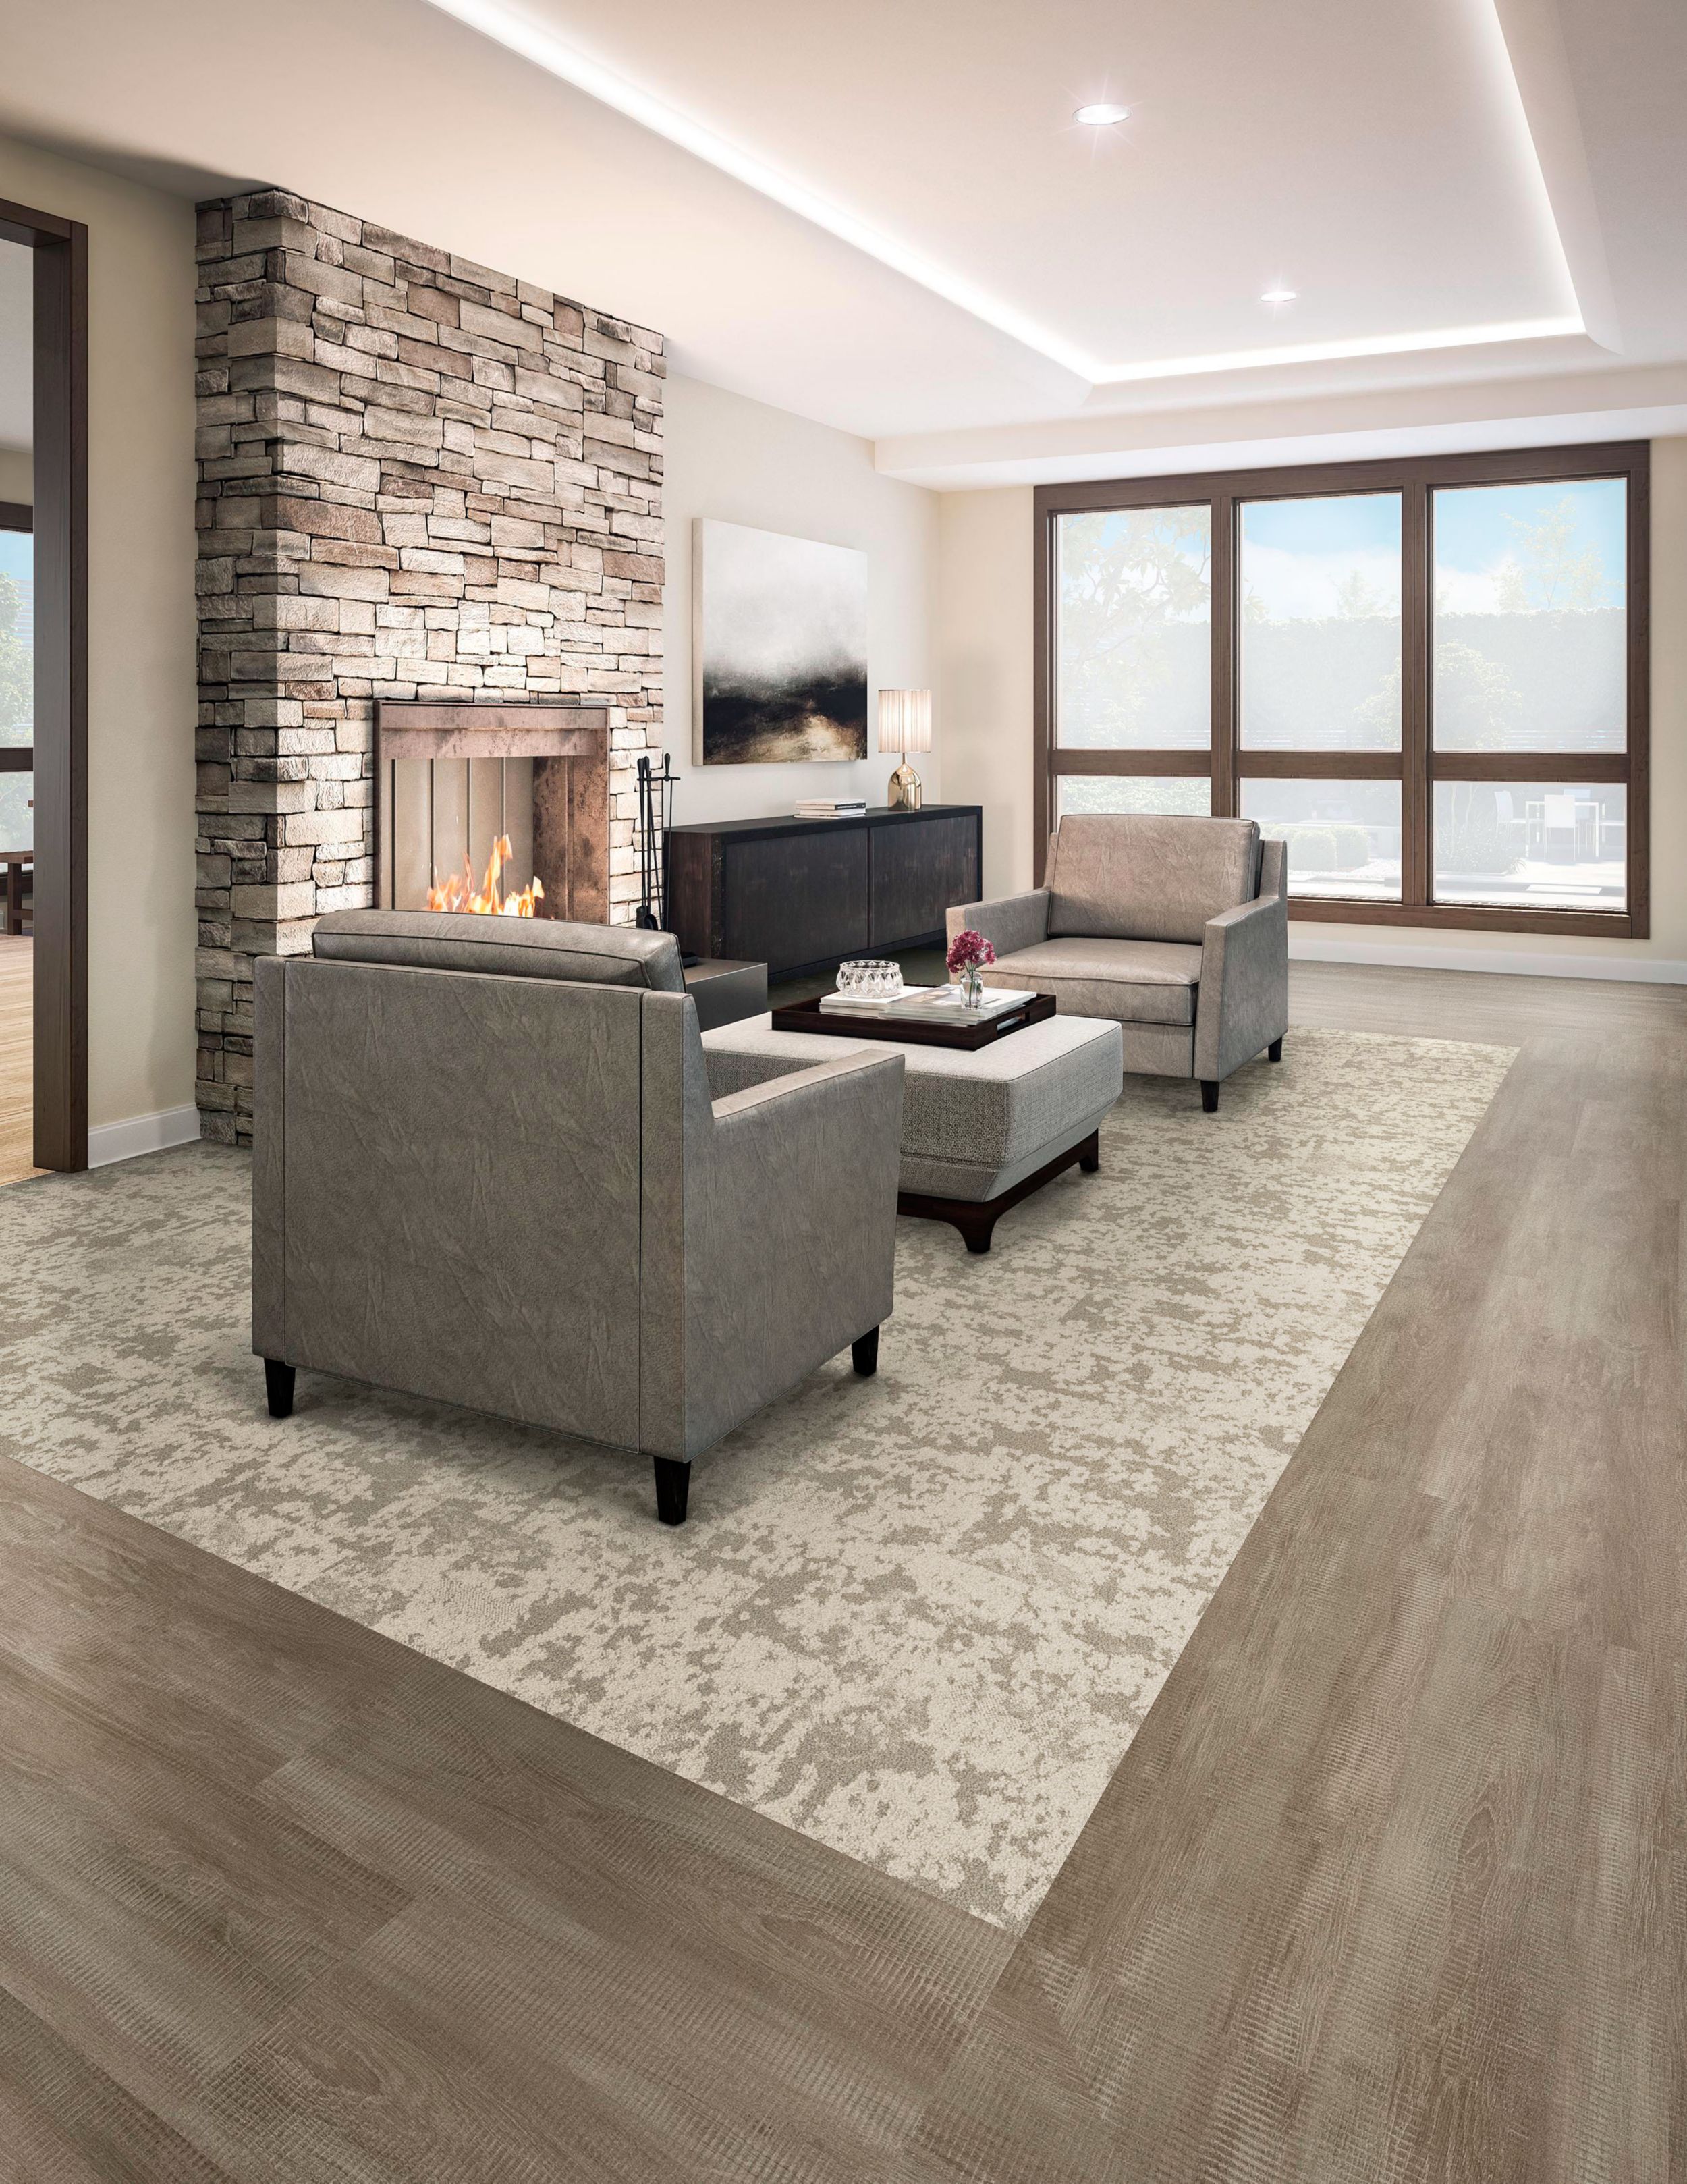 Interface Meadowland carpet tile in seating area for two with fireplace in brick wall imagen número 1